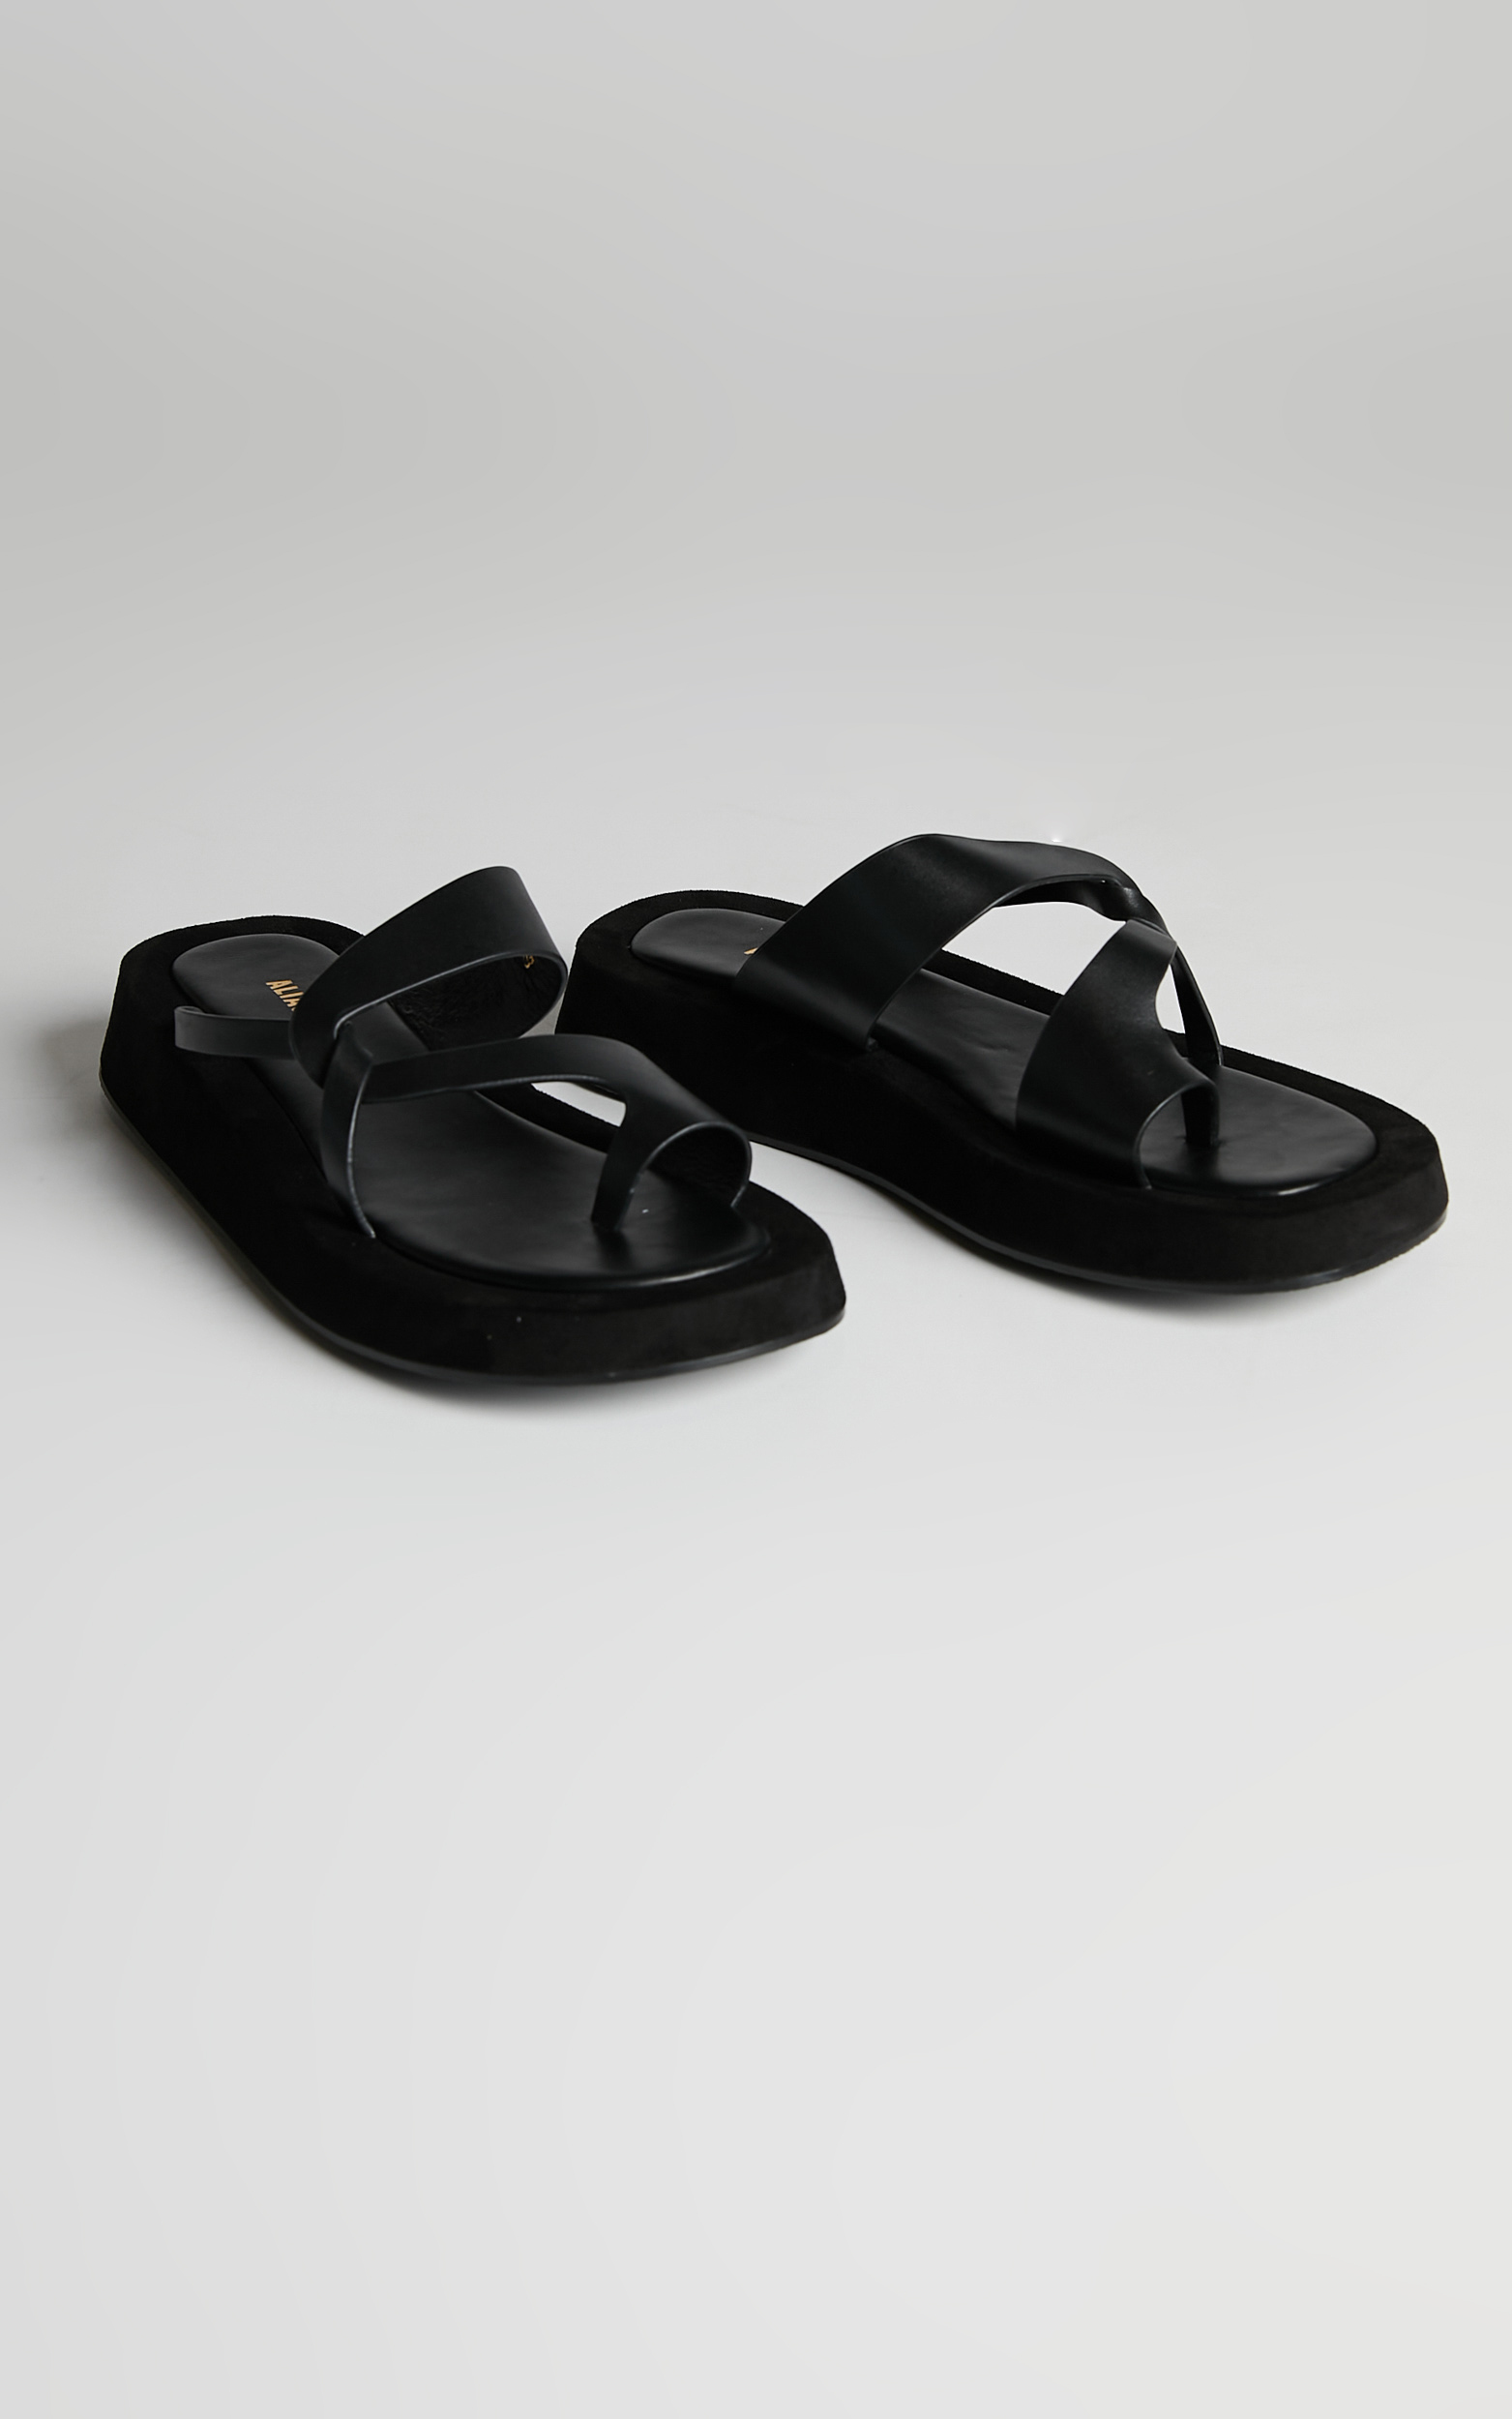 ALIAS MAE - POLO SANDALS in BLACK LEATHER - 10.5, BLK1, hi-res image number null